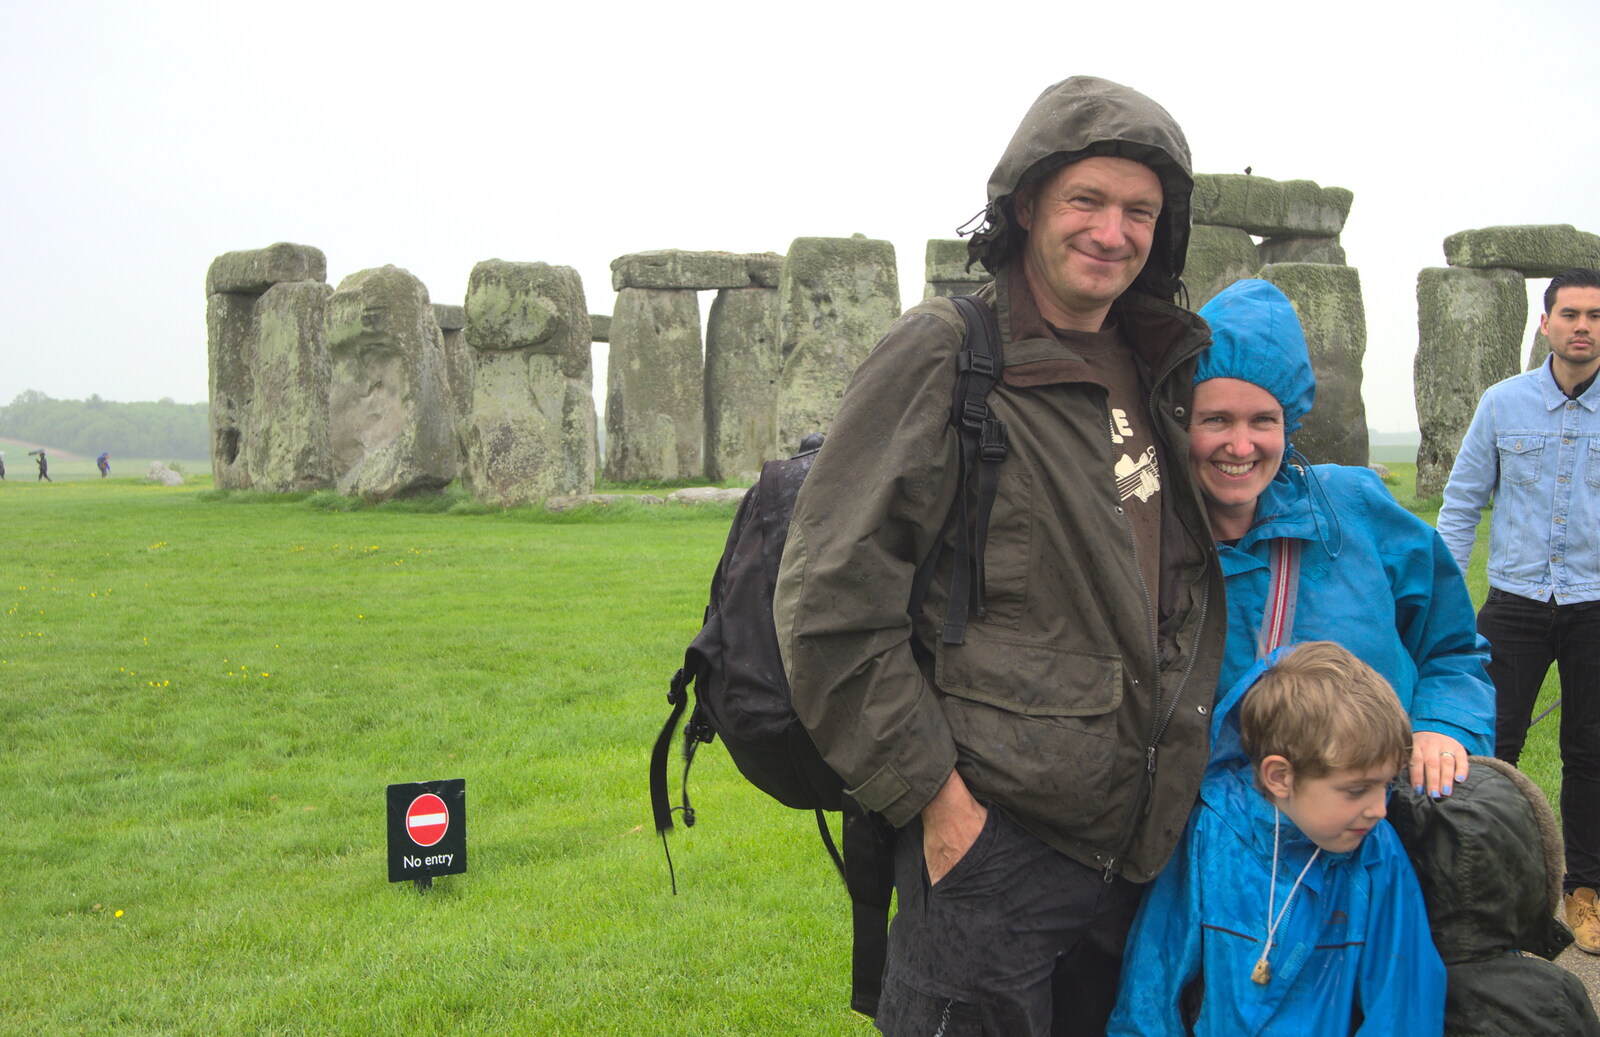 A wet family photo, courtesy of another visitor from Spreyton to Stonehenge, Salisbury Plain, Wiltshire - 31st May 2016